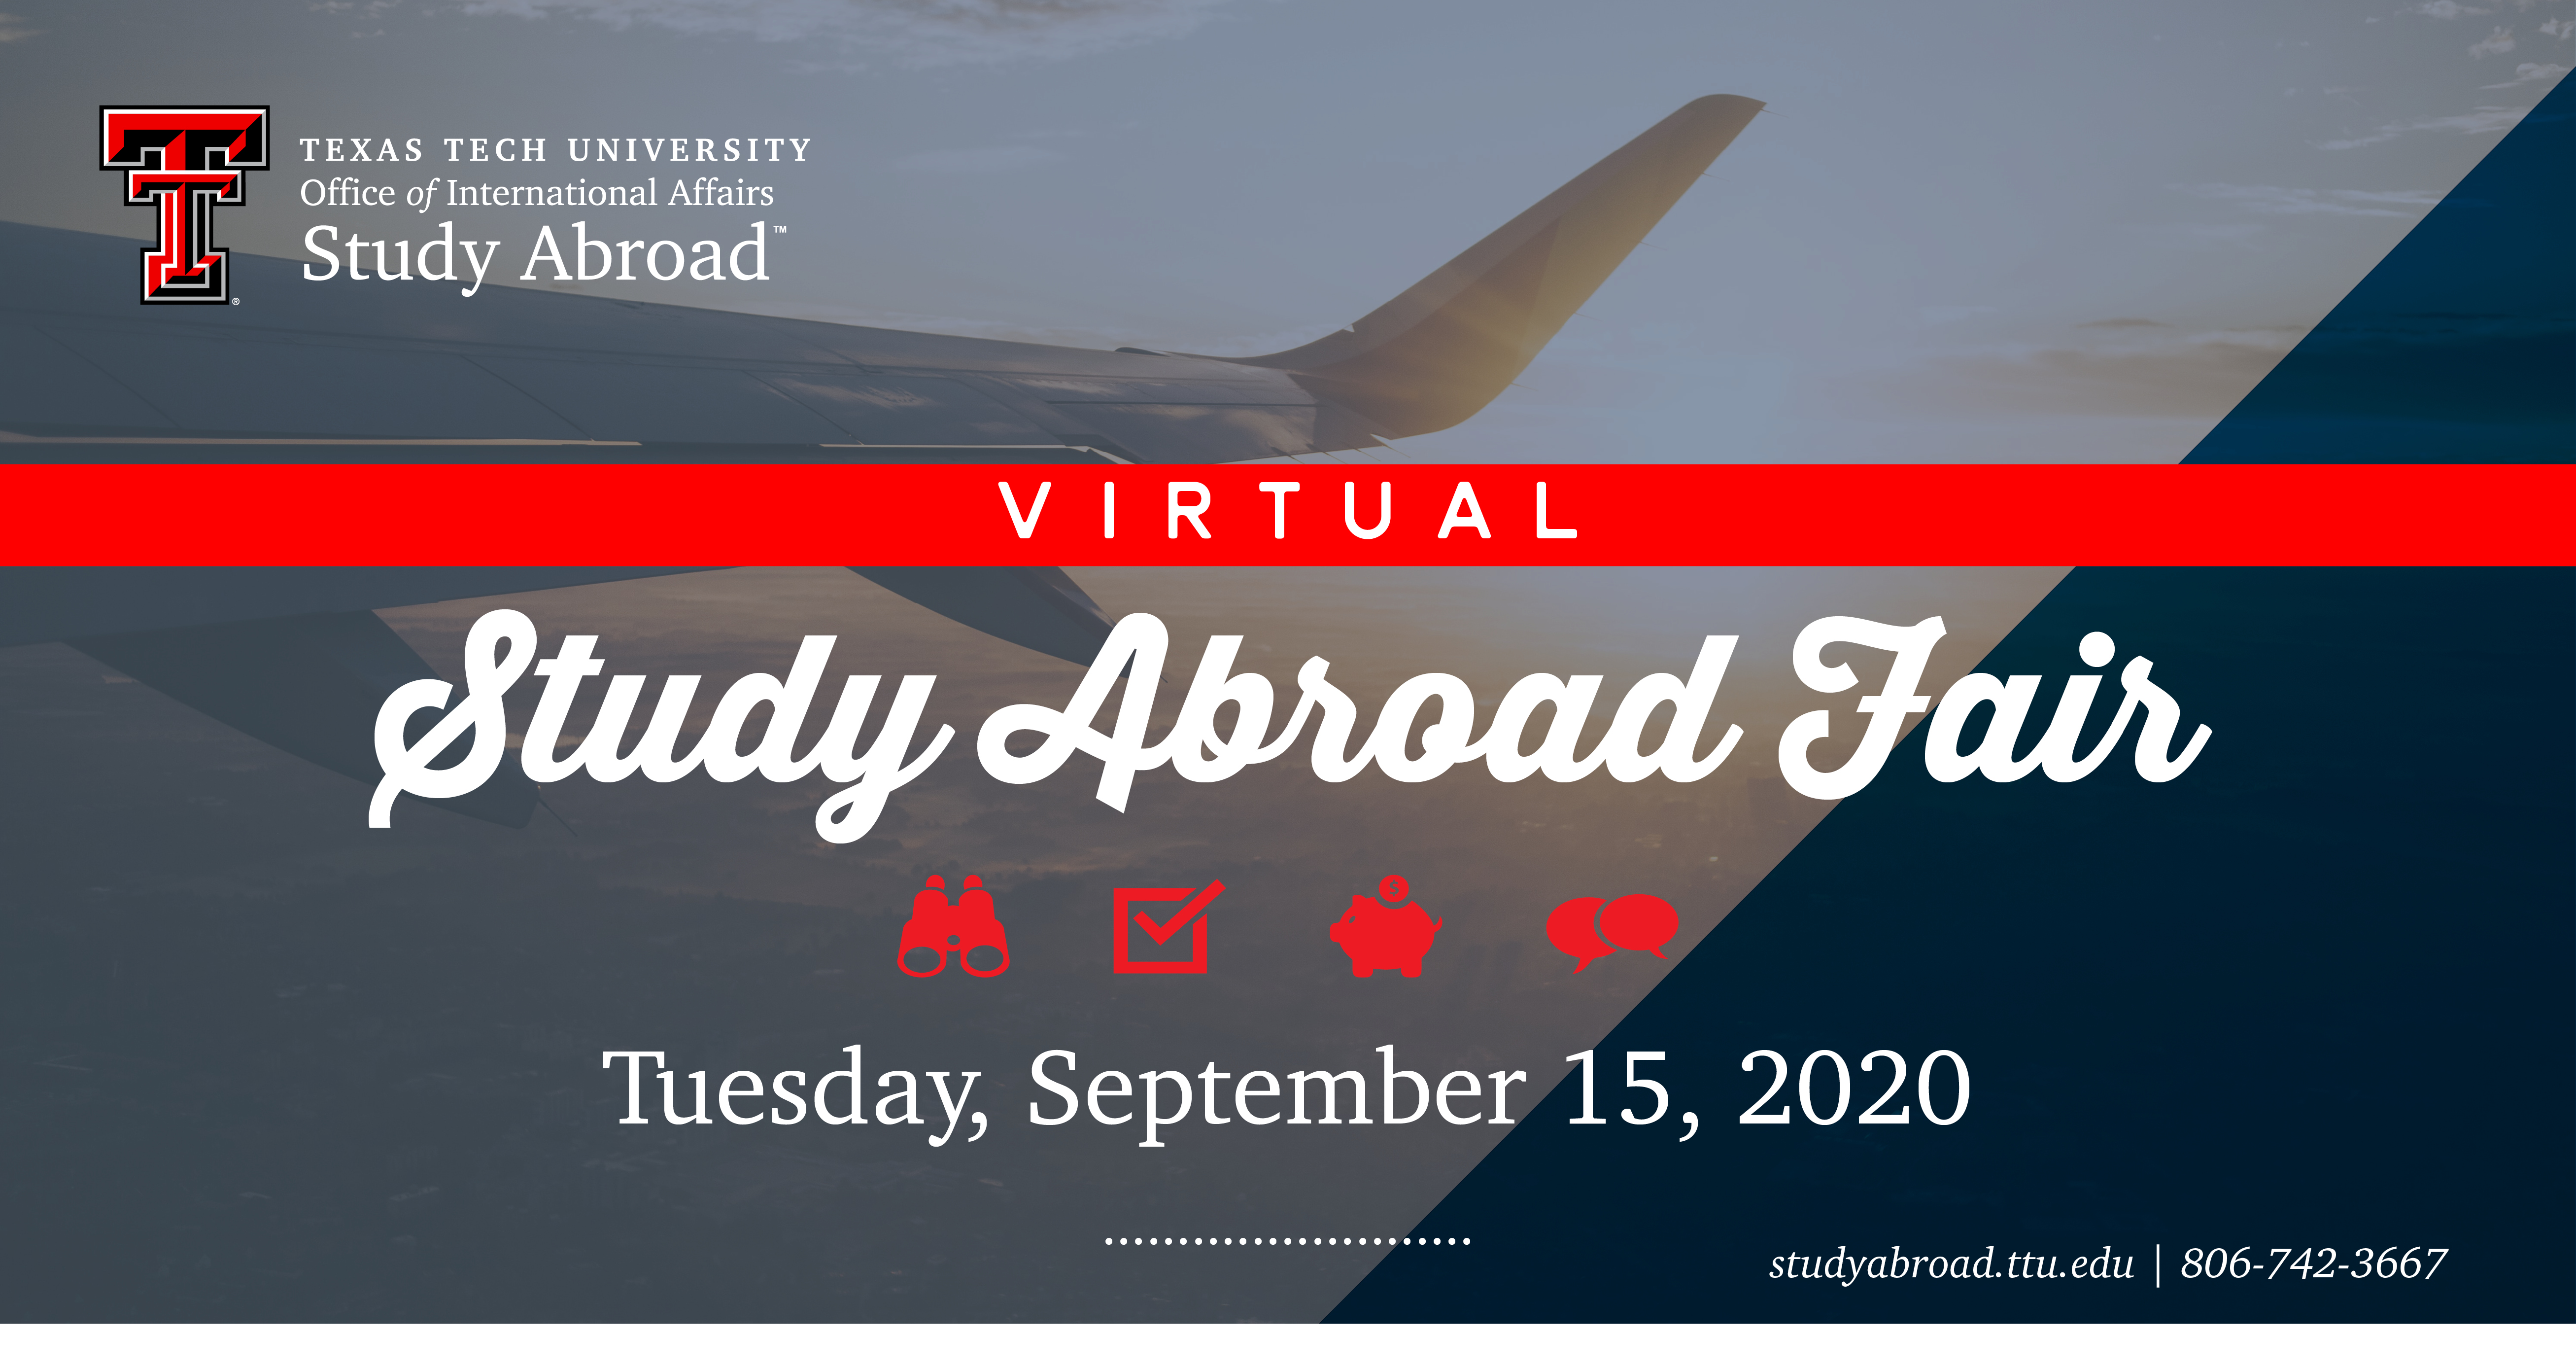 Image of an airplane wing flying through the clouds. Text over image states the virtual Study Abroad Fair will be September 15, 2020.